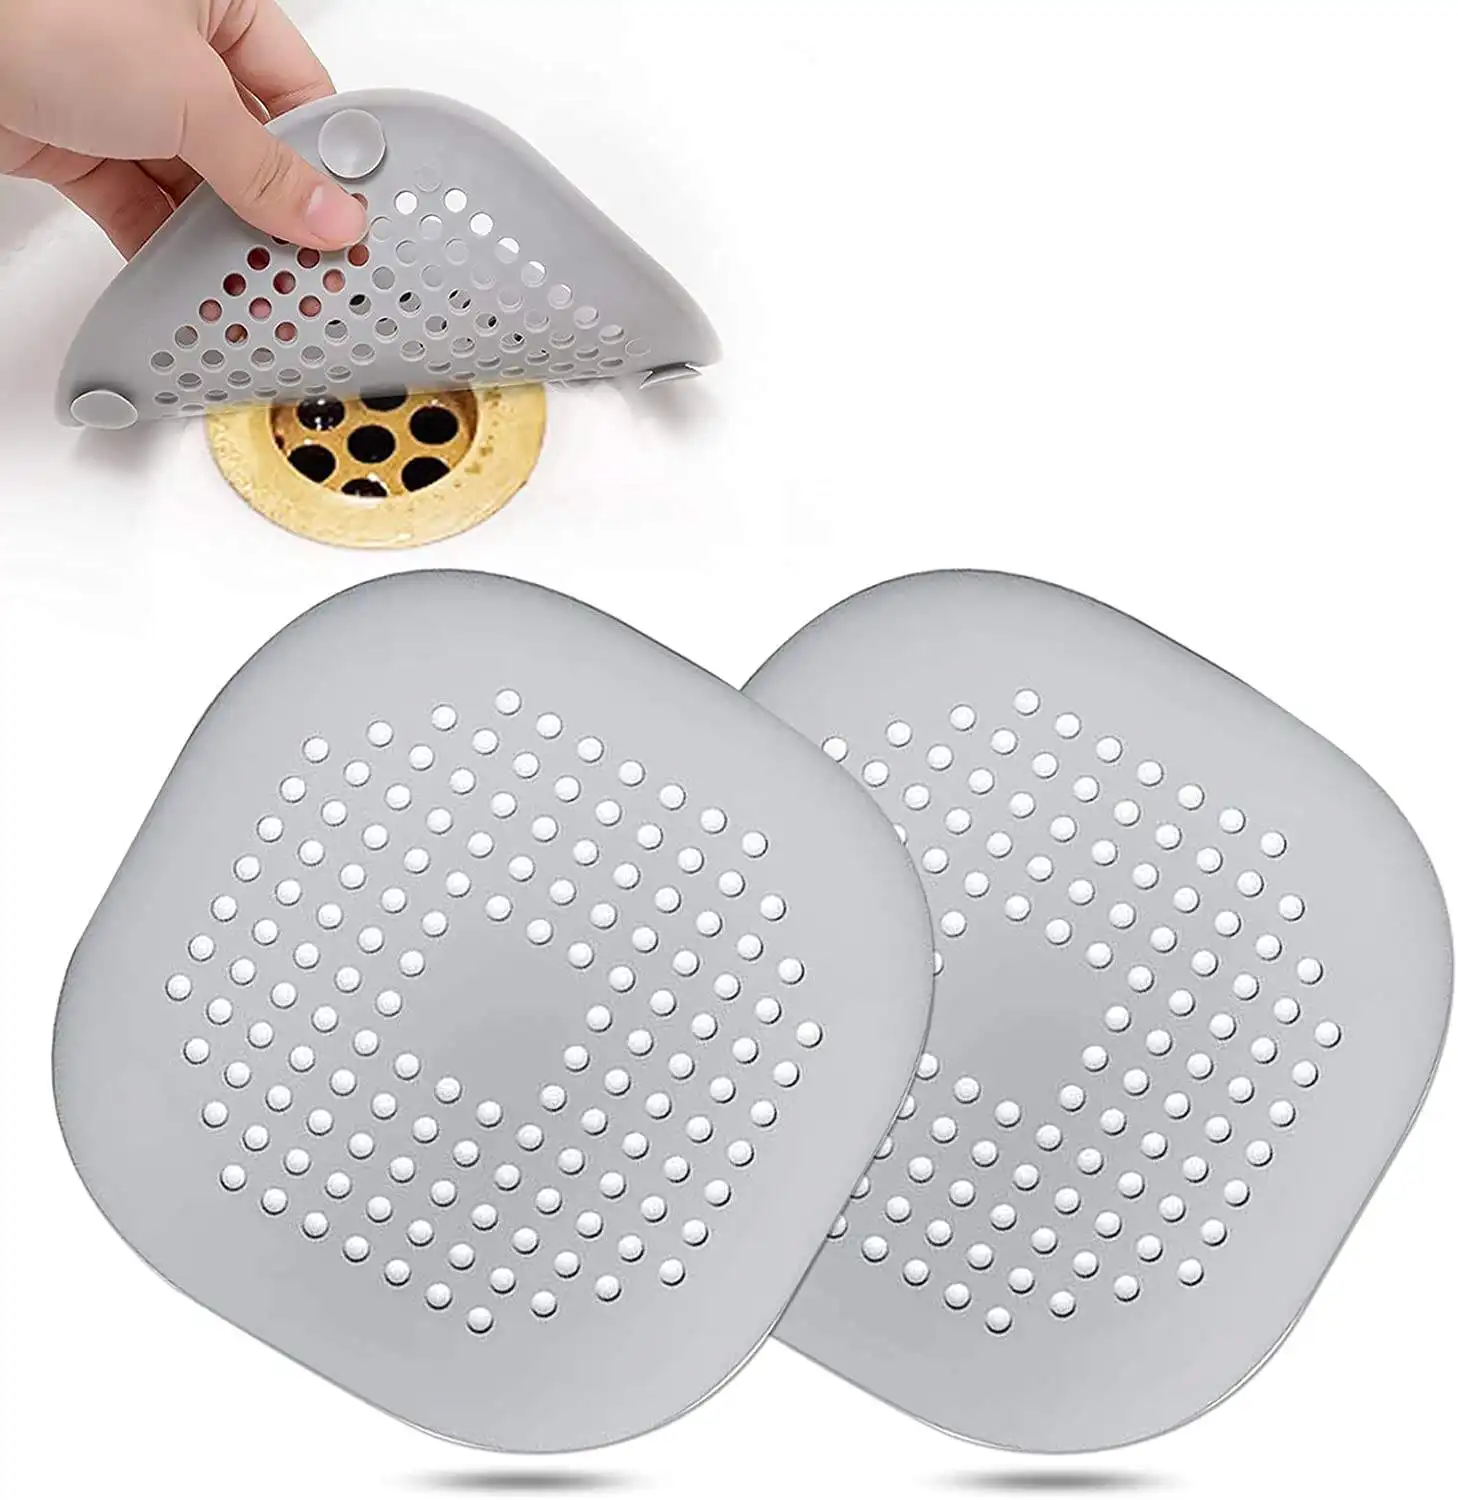 Hot Selling Drain Protector Bathroom Floor Shower Drain Hair Catcher Durable Silicone Hair Stopper Kitchen Sink Strainer